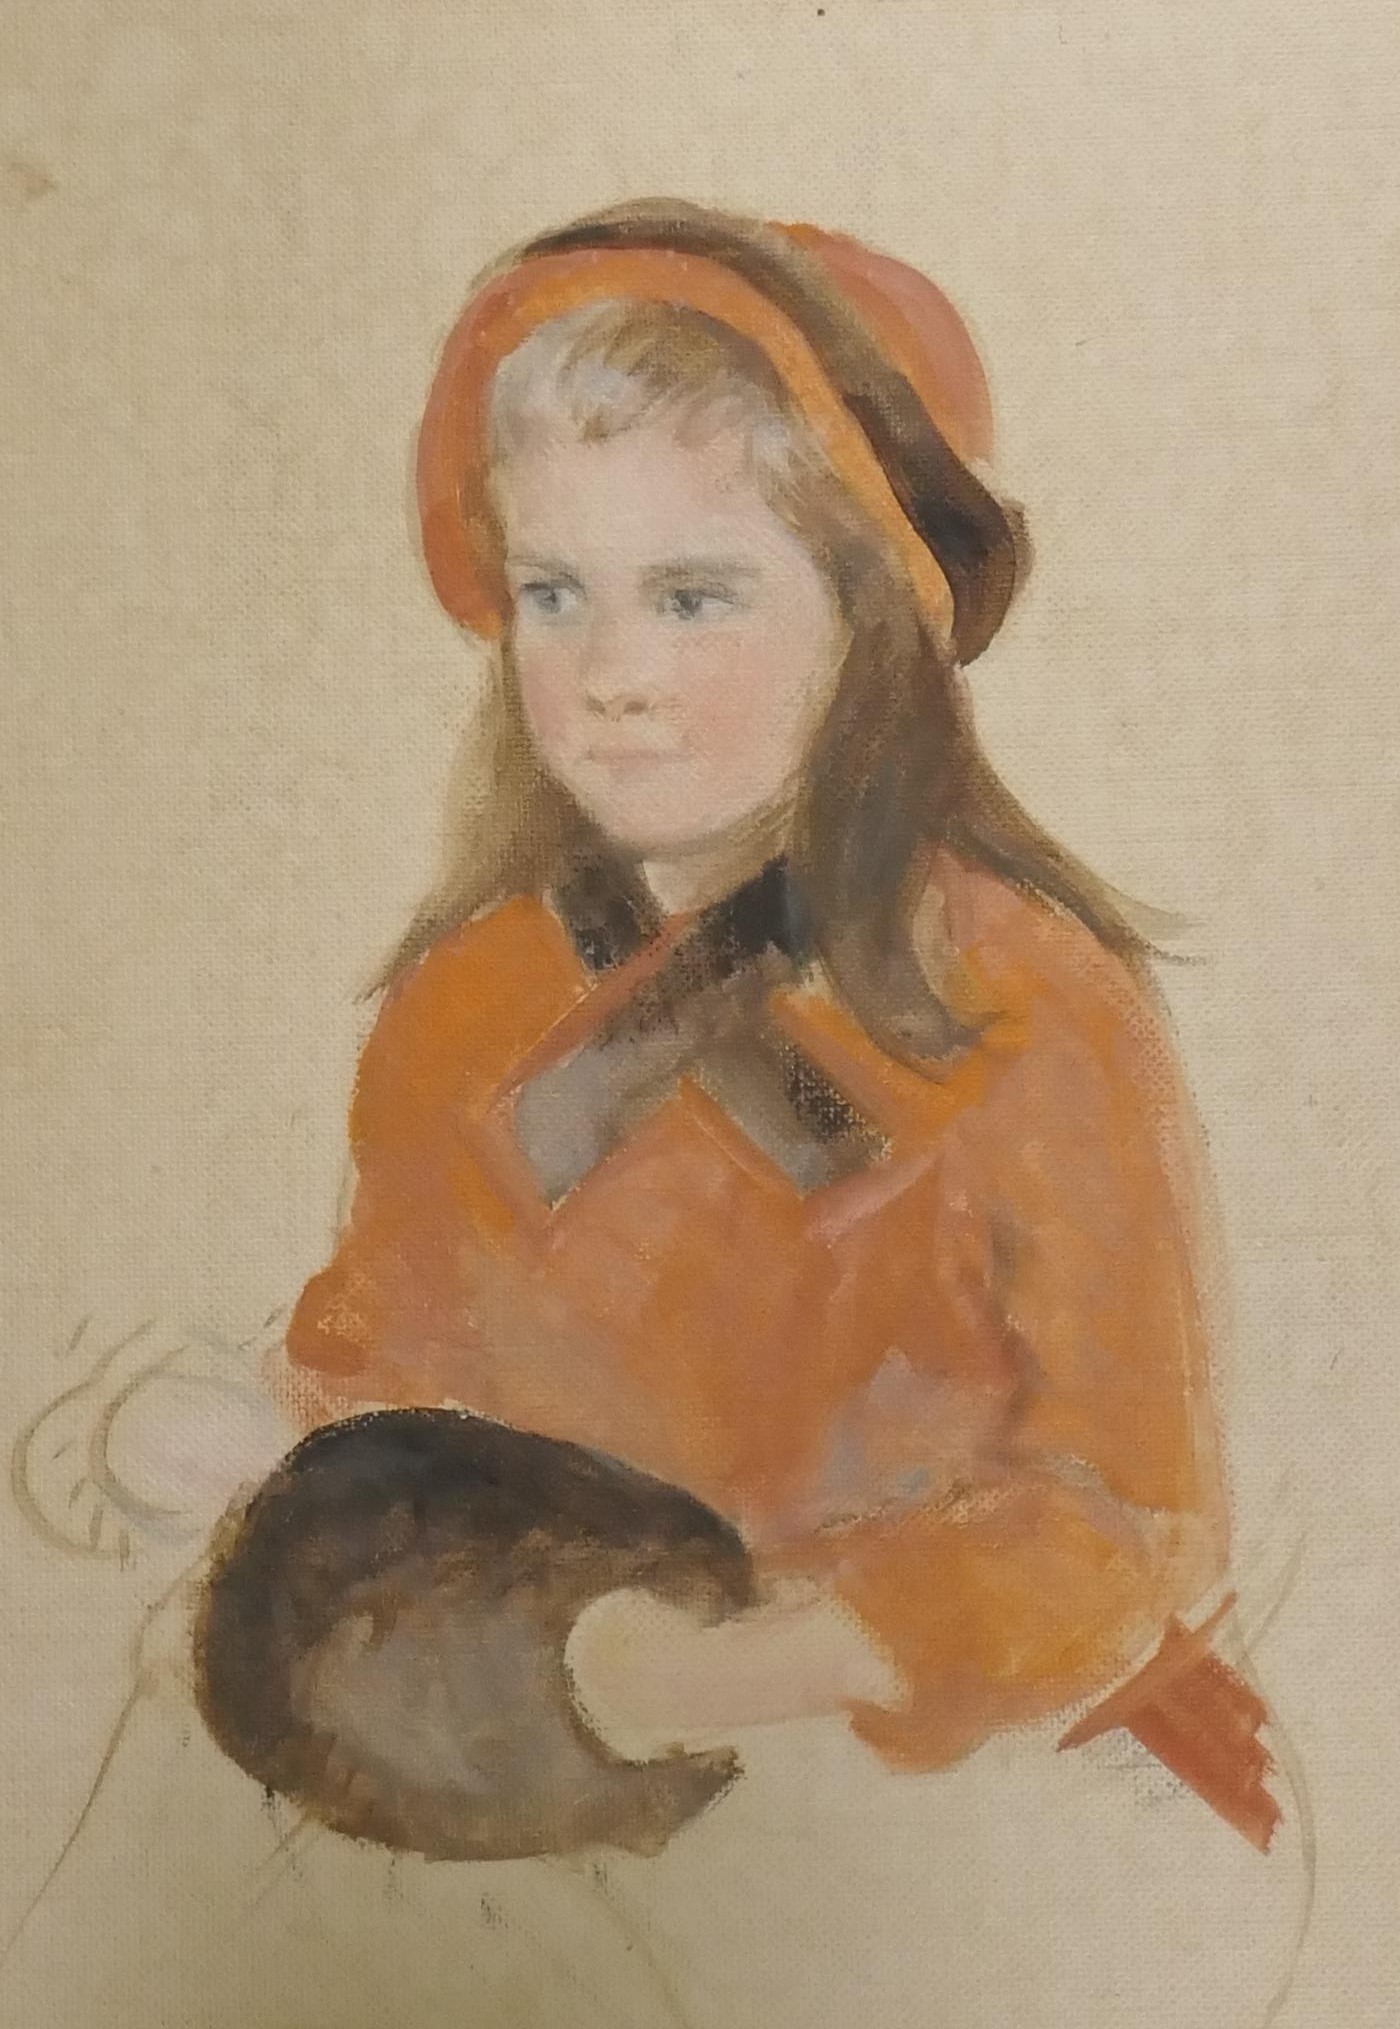 B. Melcher, (American), Allegra, portrait of a young girl, labelled verso, dated 1968, oil on canvas